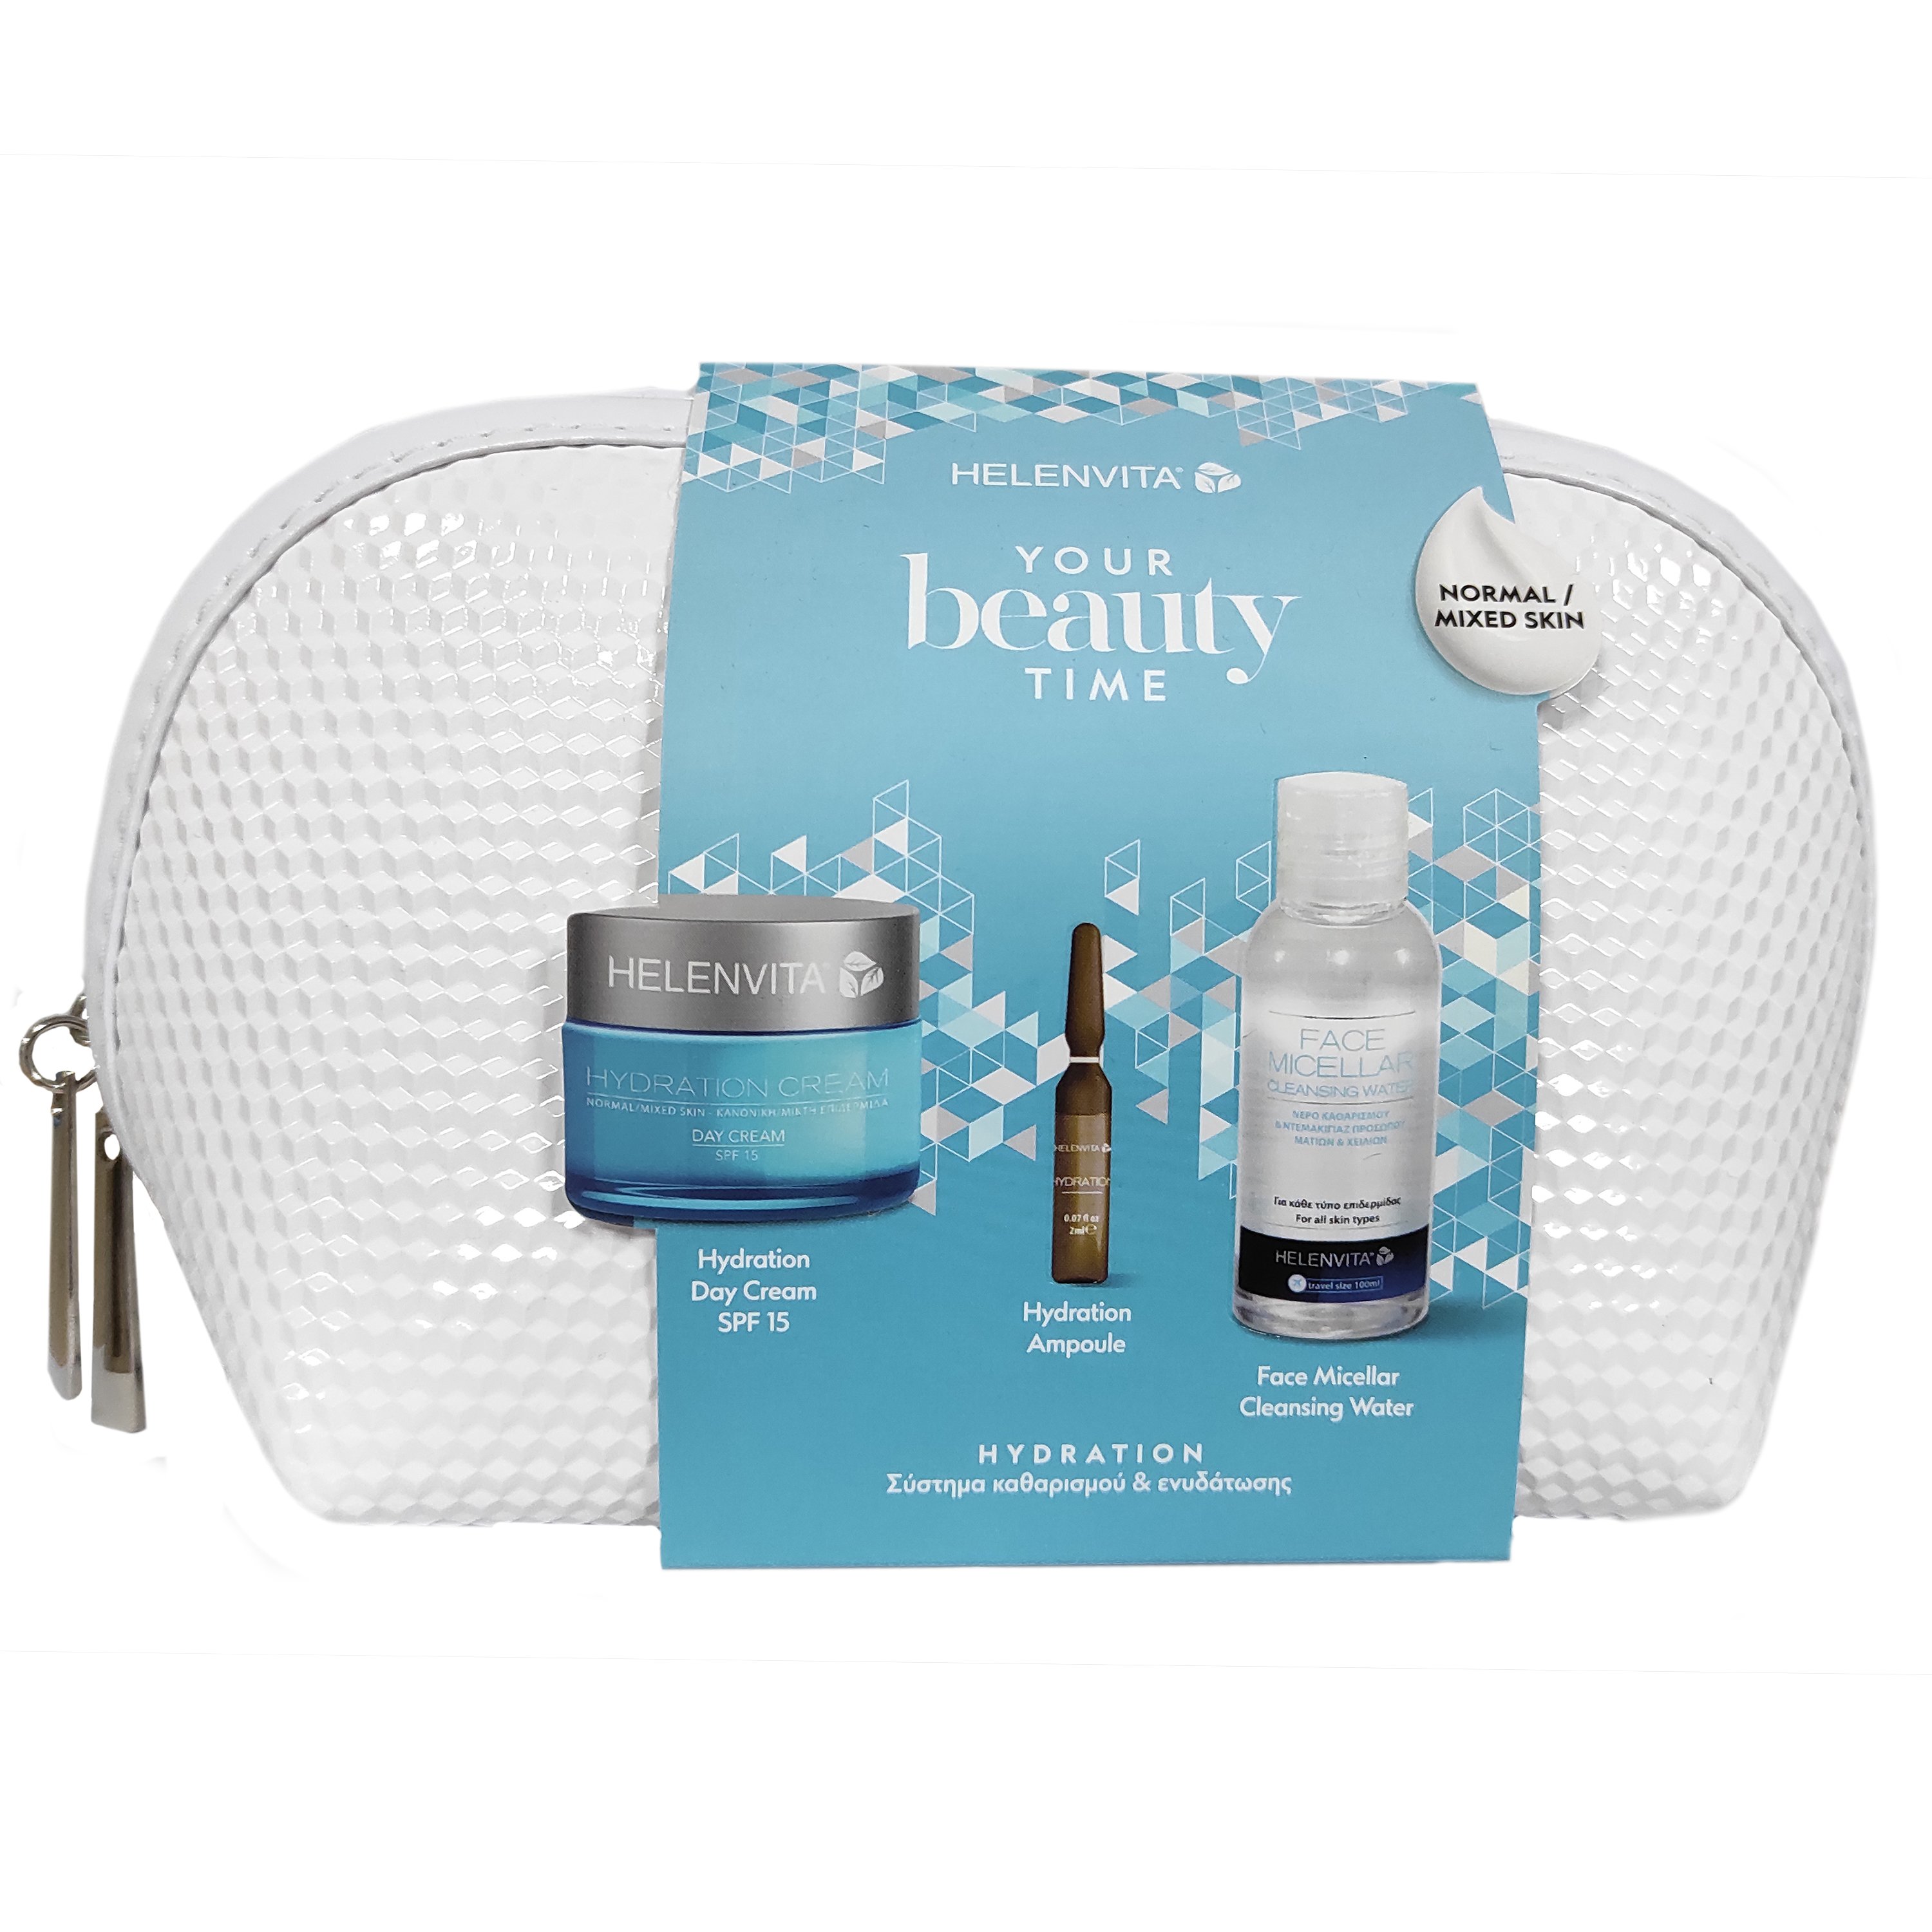 Helenvita Πακέτο Προσφοράς Hydration Day Cream Spf15 Normal / Mixed Skin 50ml, Instant Hydration & Wrinkle Filler 1 Ampoule x 2ml, Face Micellar Cleansing Water 400ml & Δώρο Νεσεσέρ